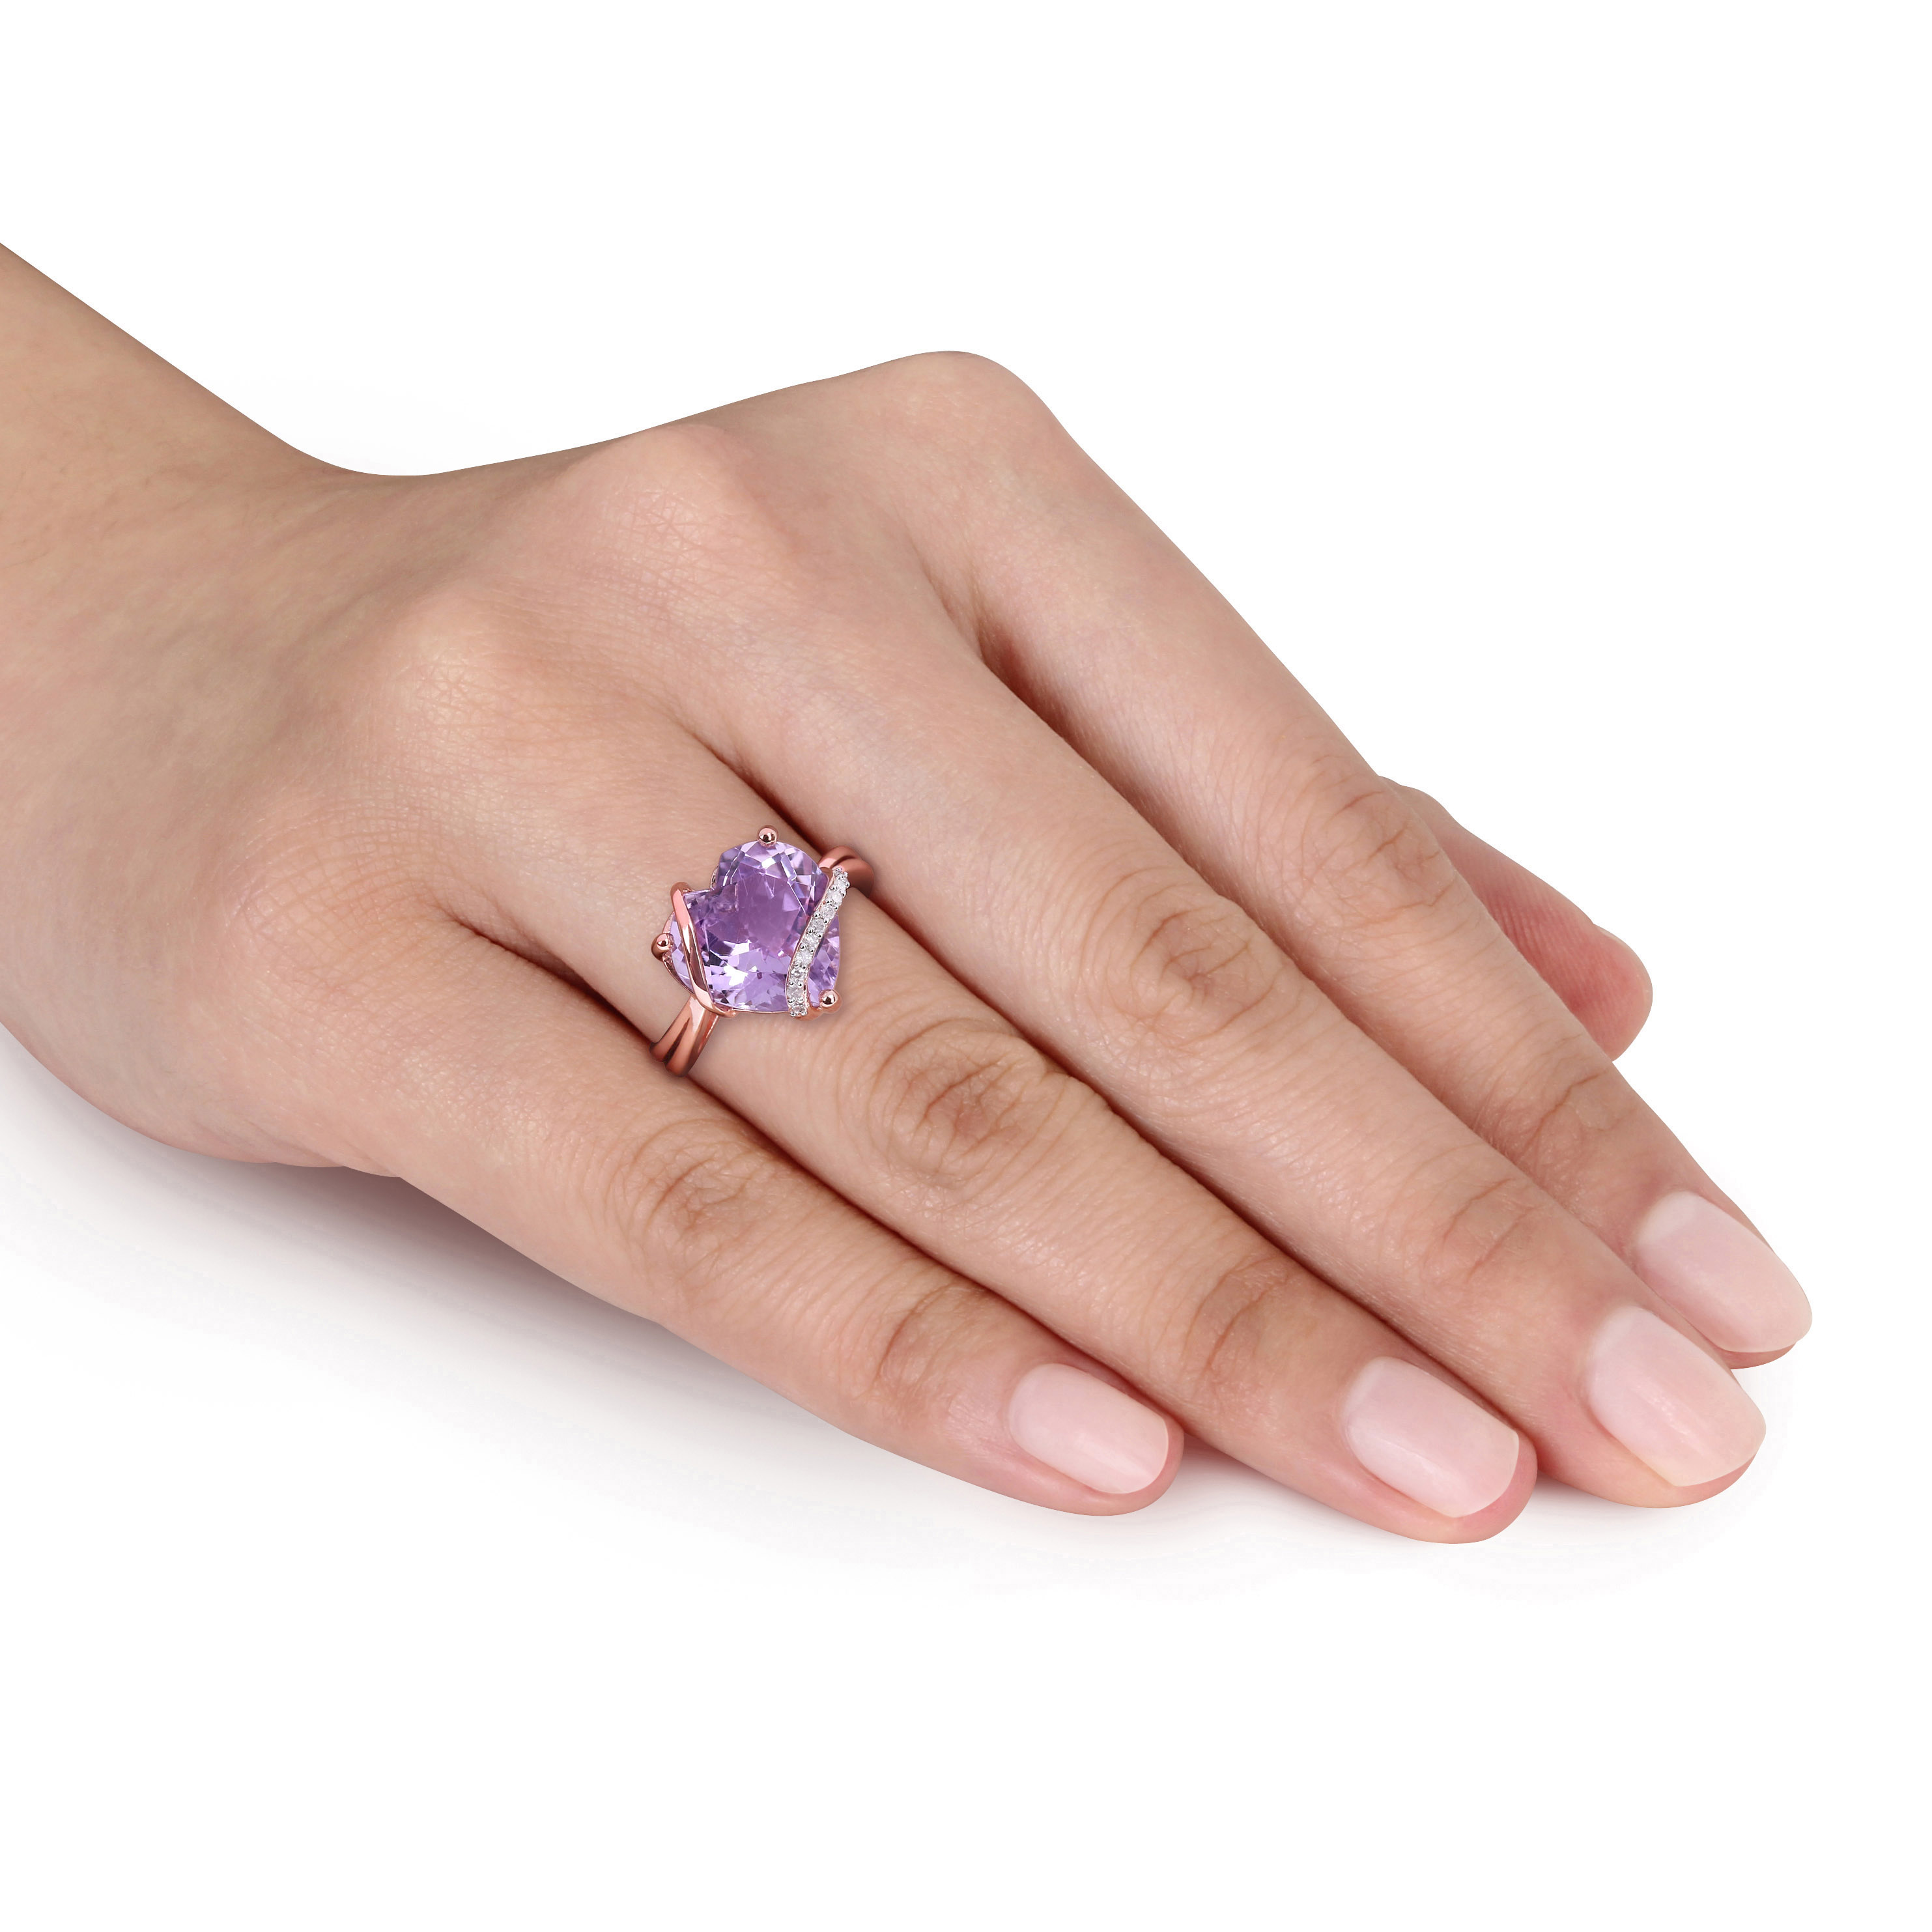 6 1/2 CT TGW Amethyst and Diamond Accent Heart Ring in Rose Plated Sterling Silver